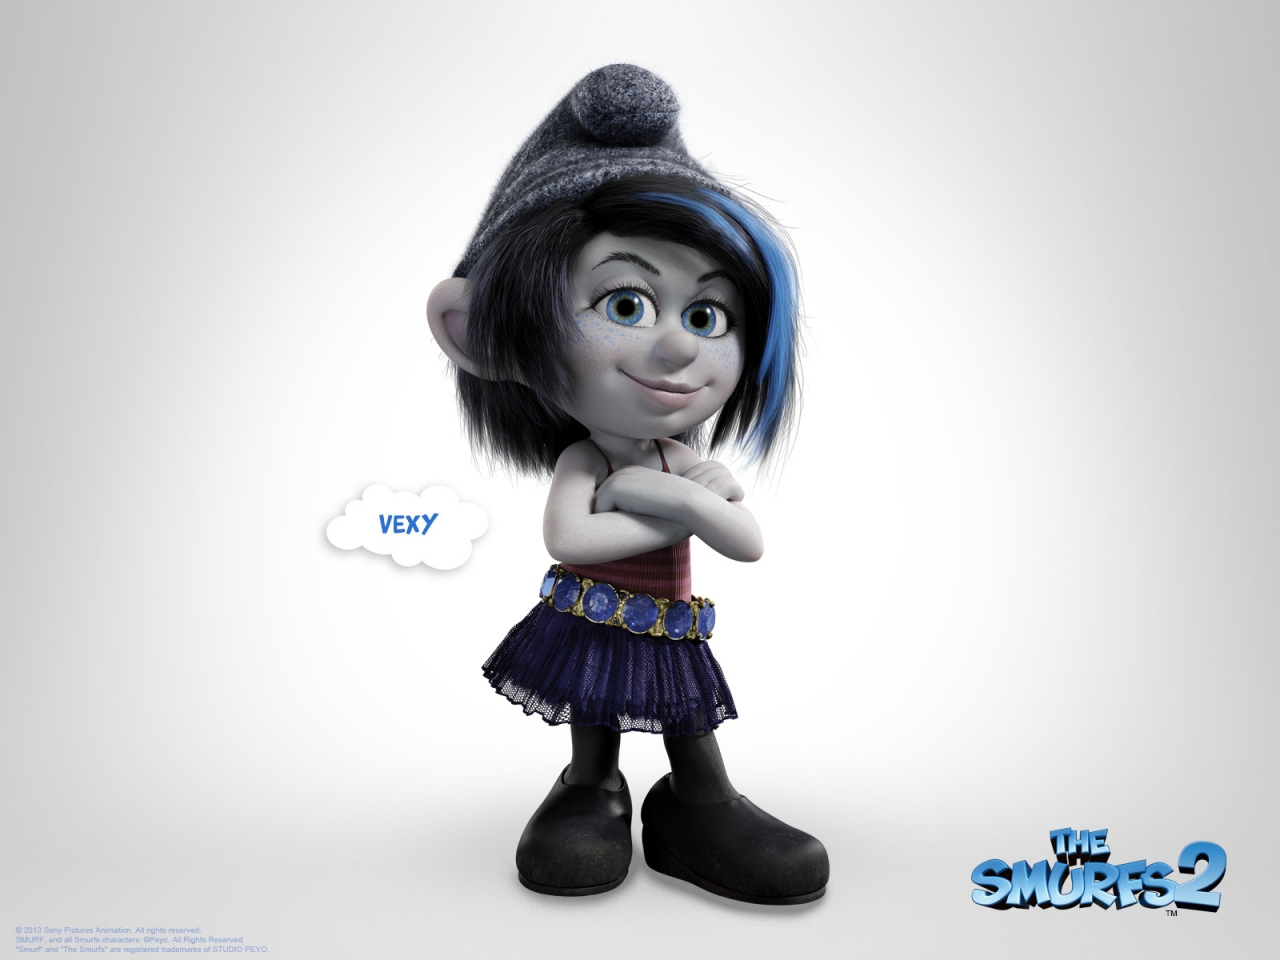 Vexy The Smurfs 2 for 1280 x 960 resolution